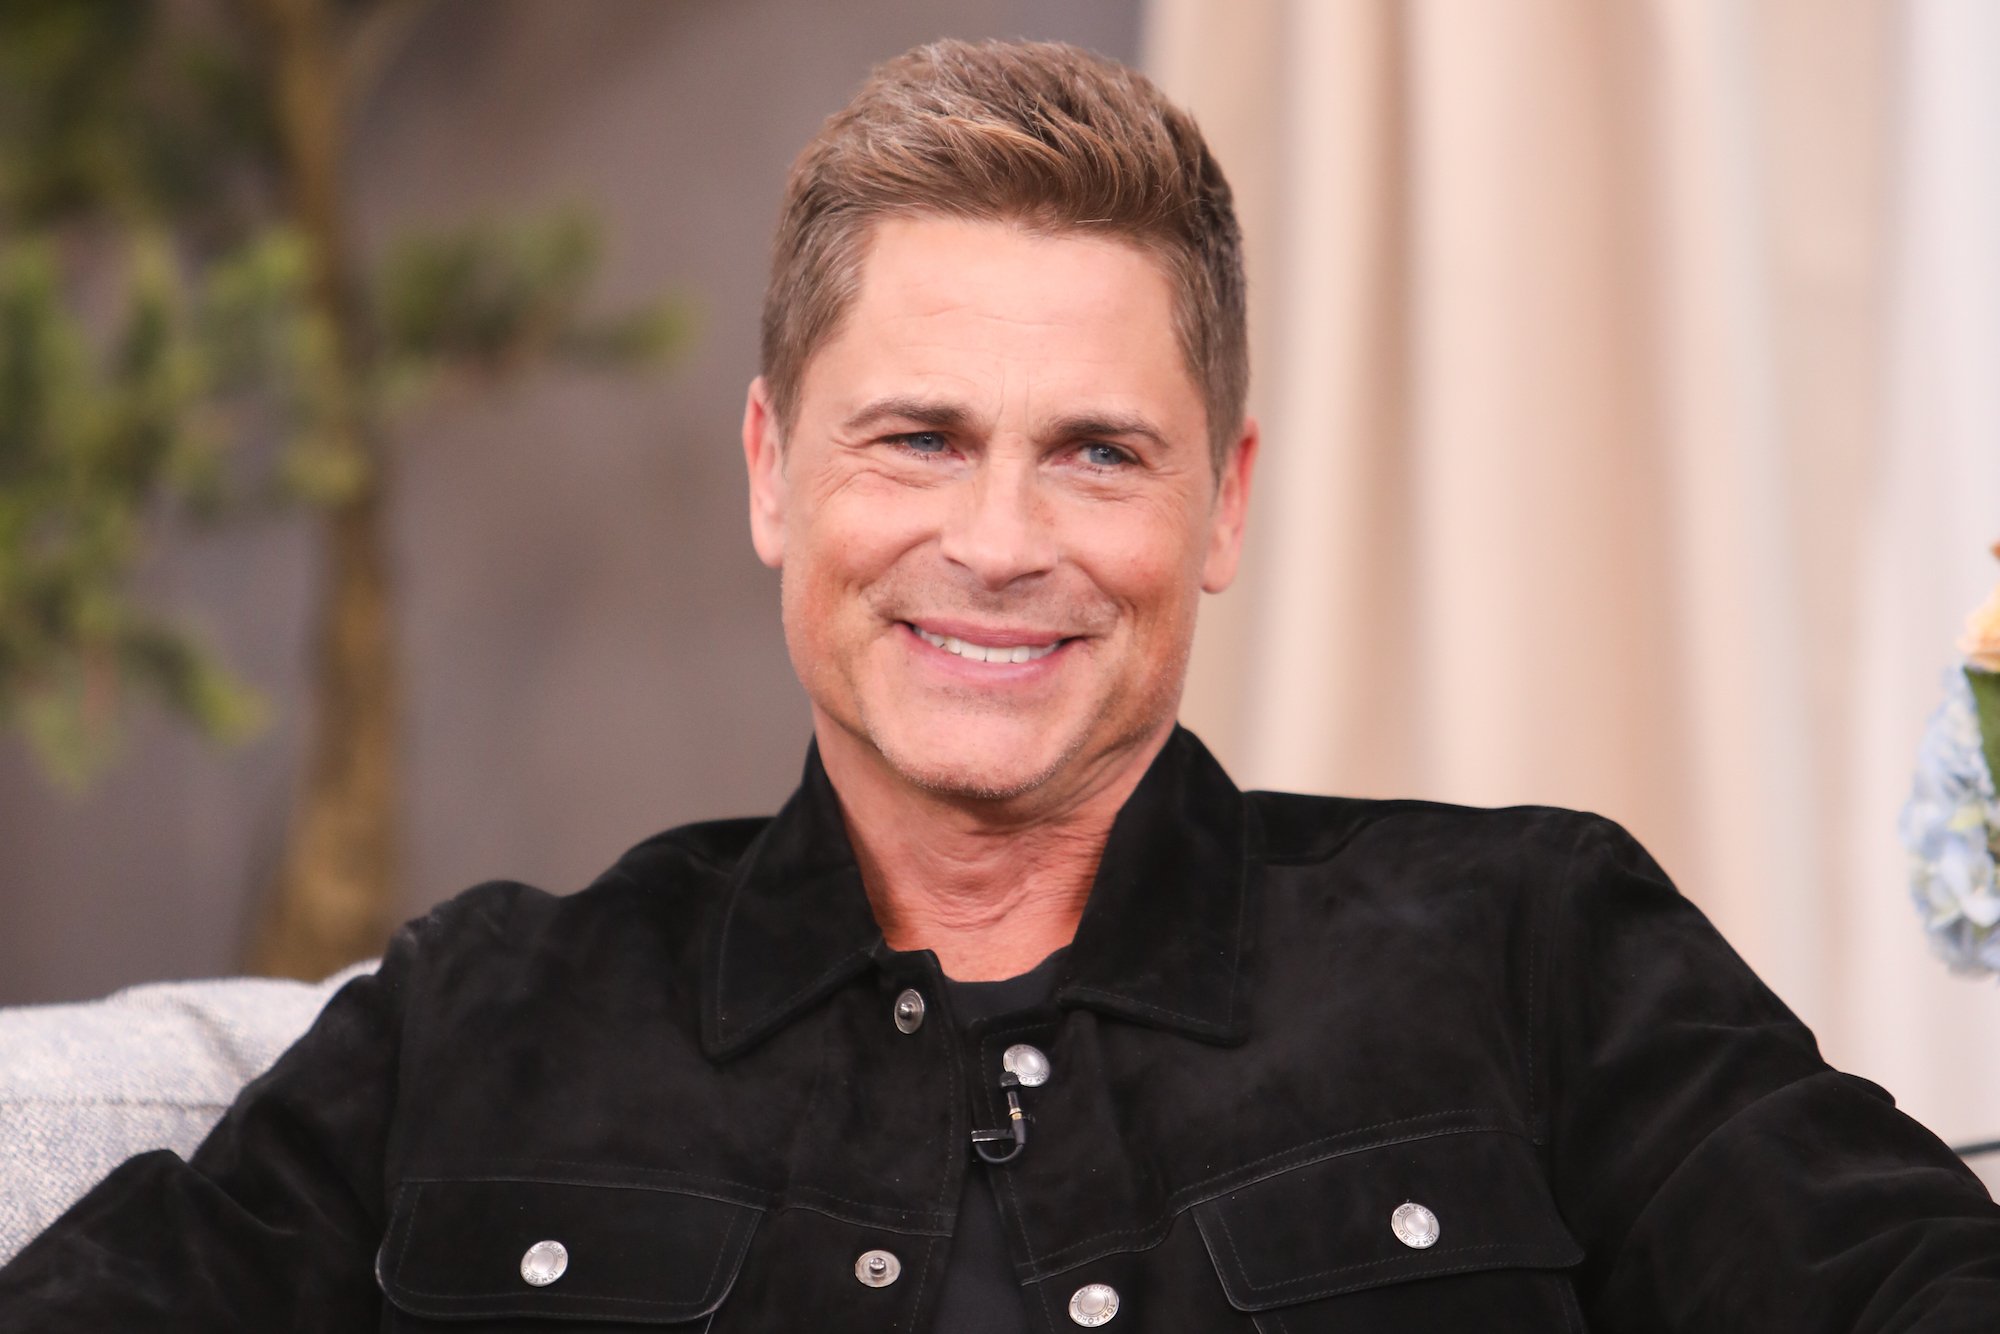 Rob Lowe smiling, turned to the side